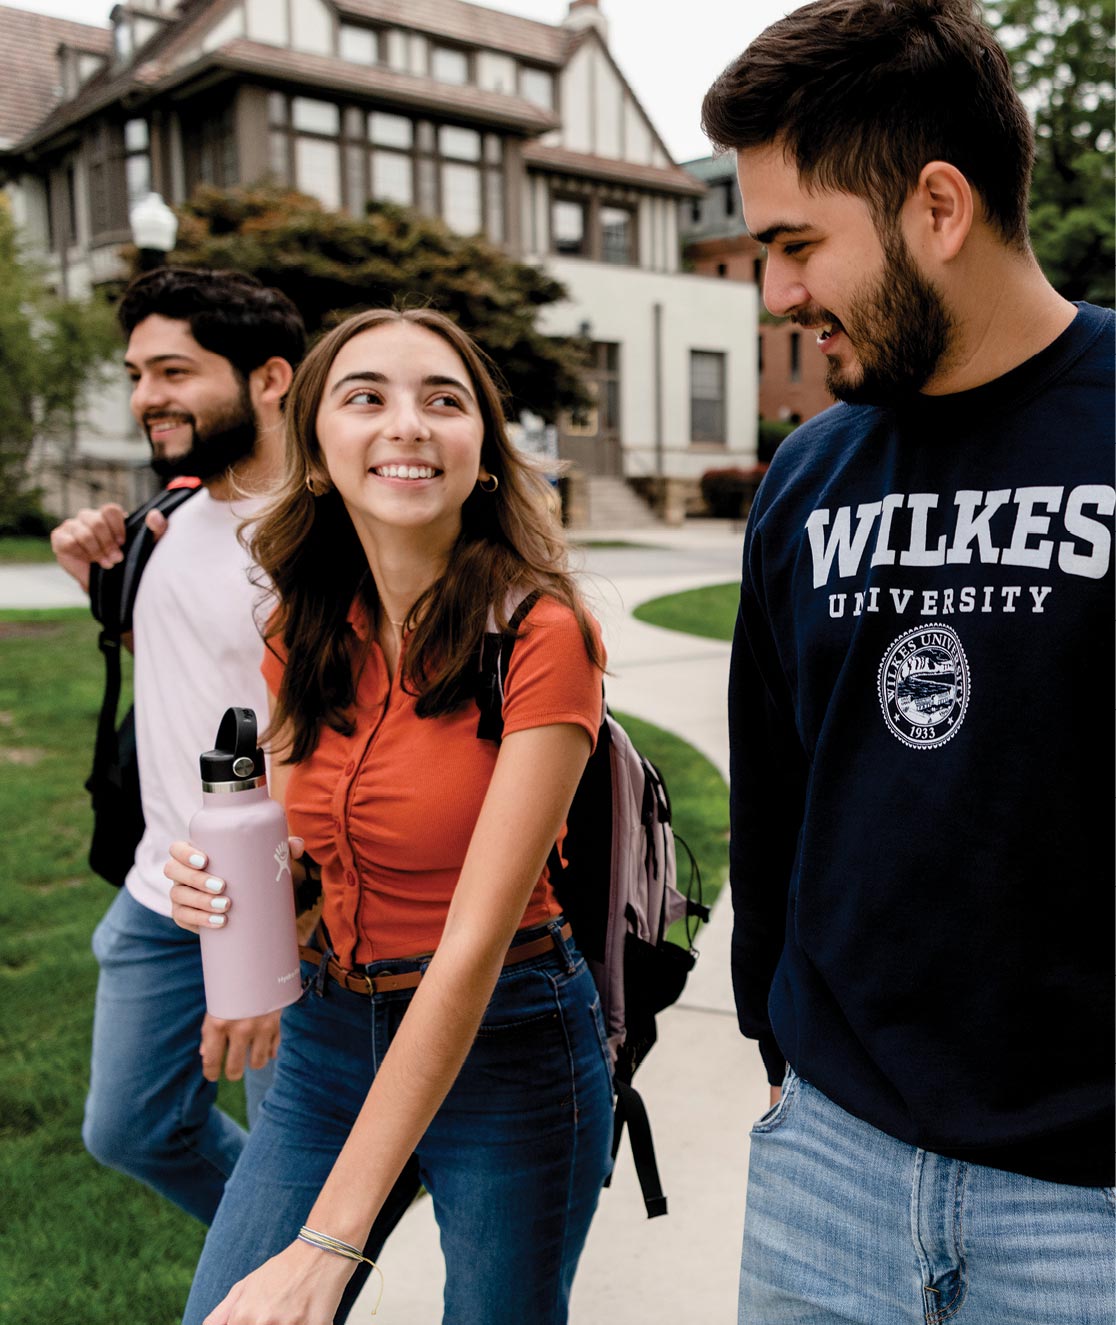 Three students walking and talking on campus